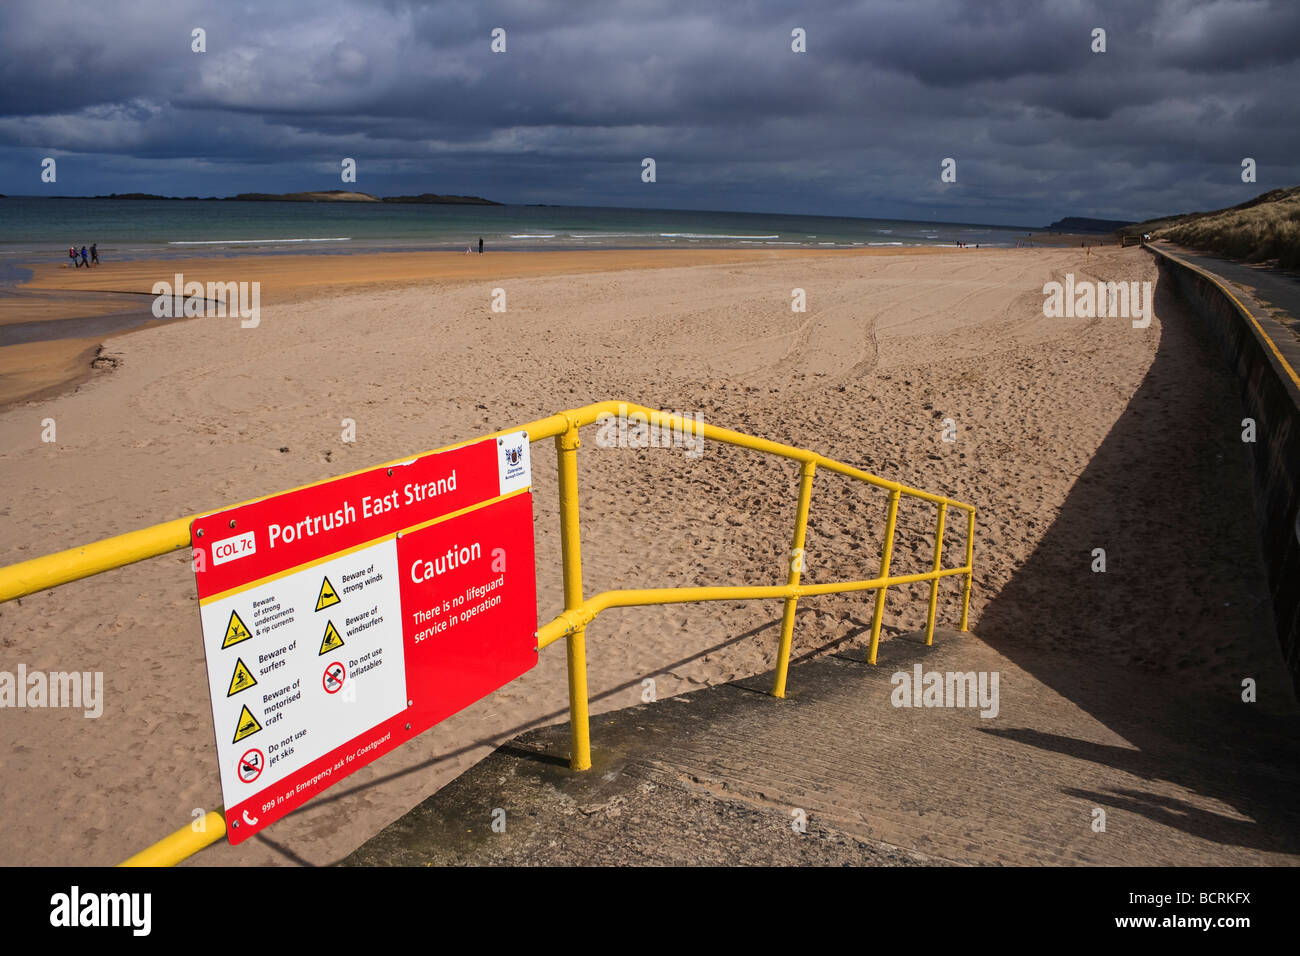 Looking east long Portrush East Strand on a clooudy day Stock Photo